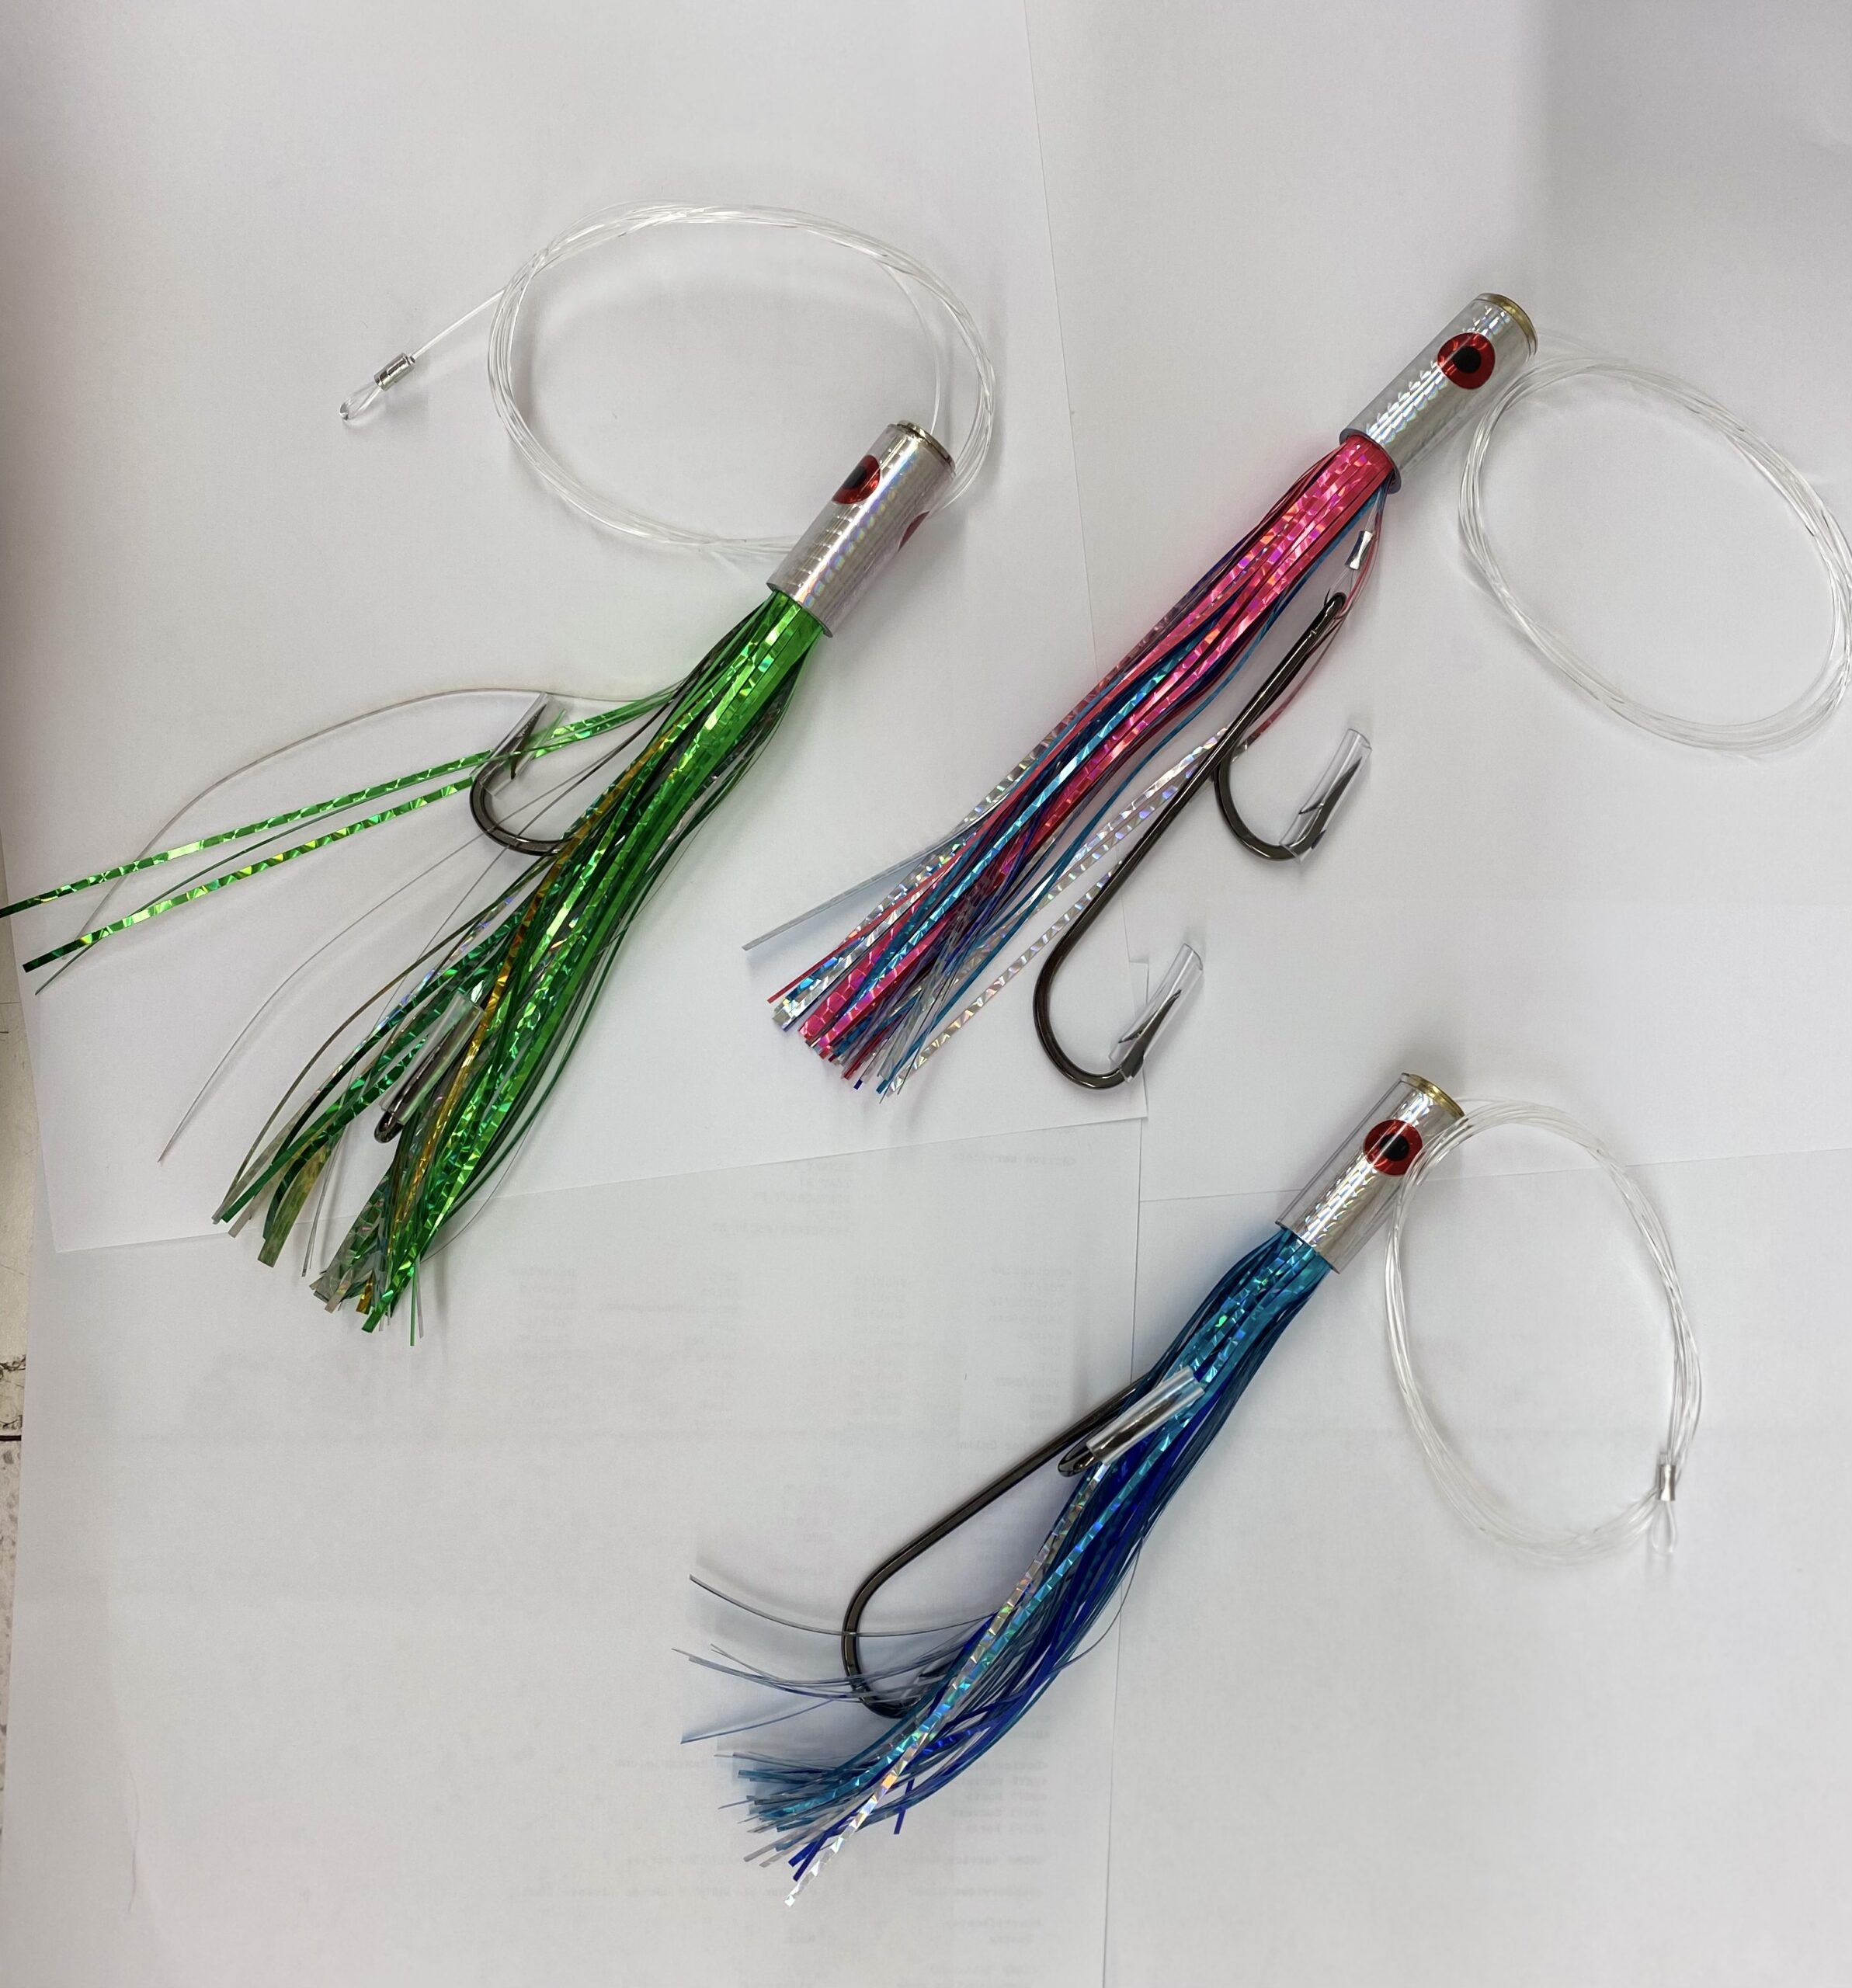 CenterFire Lures rigged with our Awesome Double Trouble Hooks at